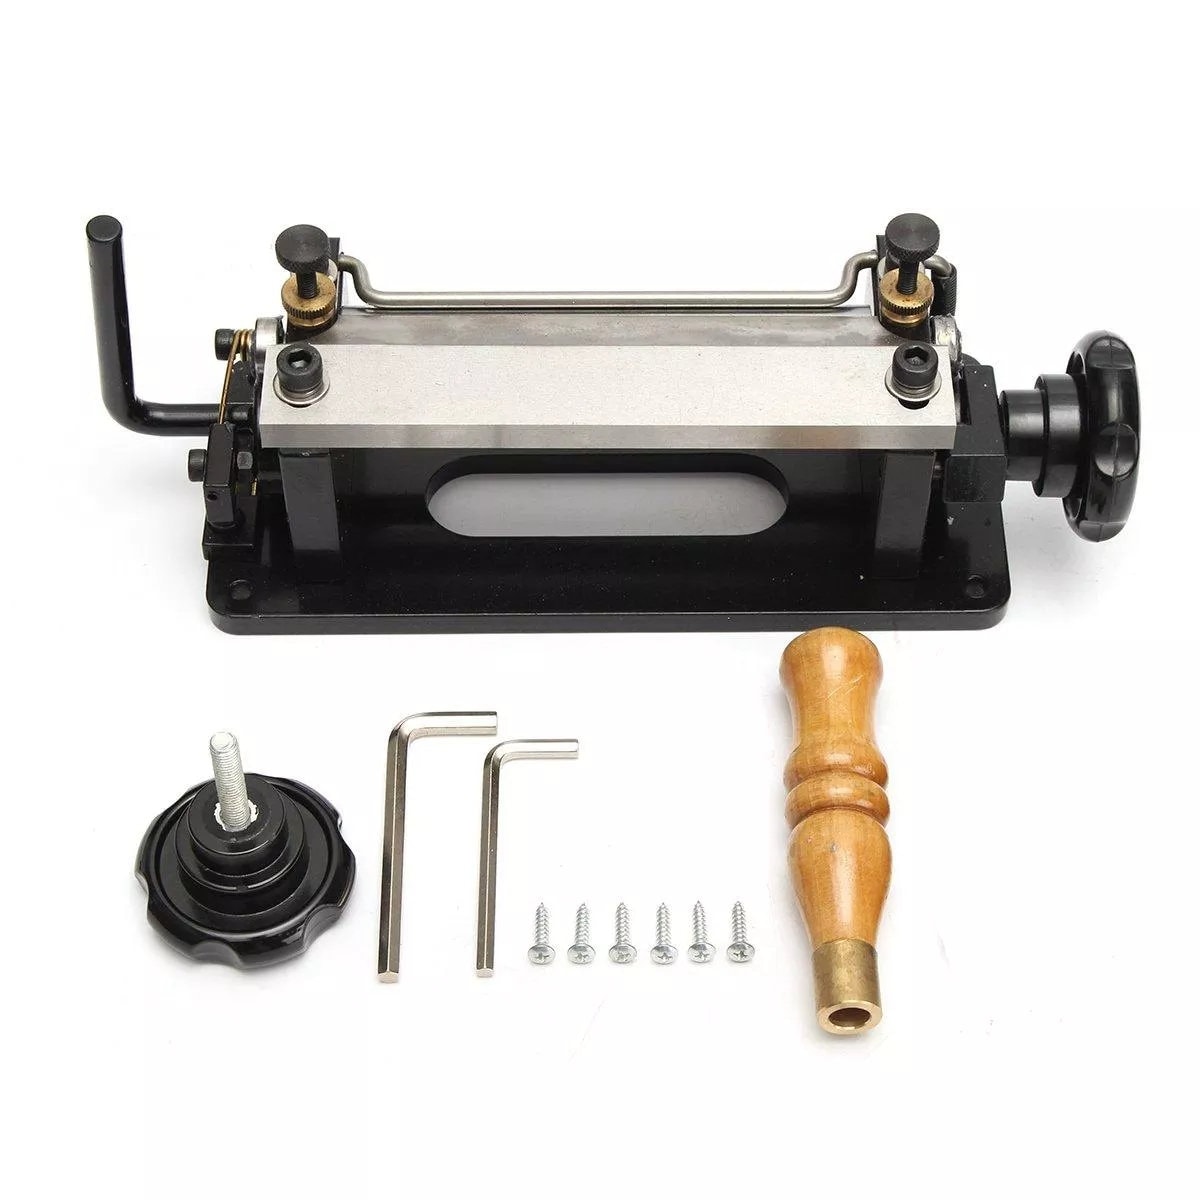  LuckyHigh Manual Leather Skiver Leather Peeler Leather Paring  Machine Leather Craft Edge Skiving Machine with 15PCS Extra Blades